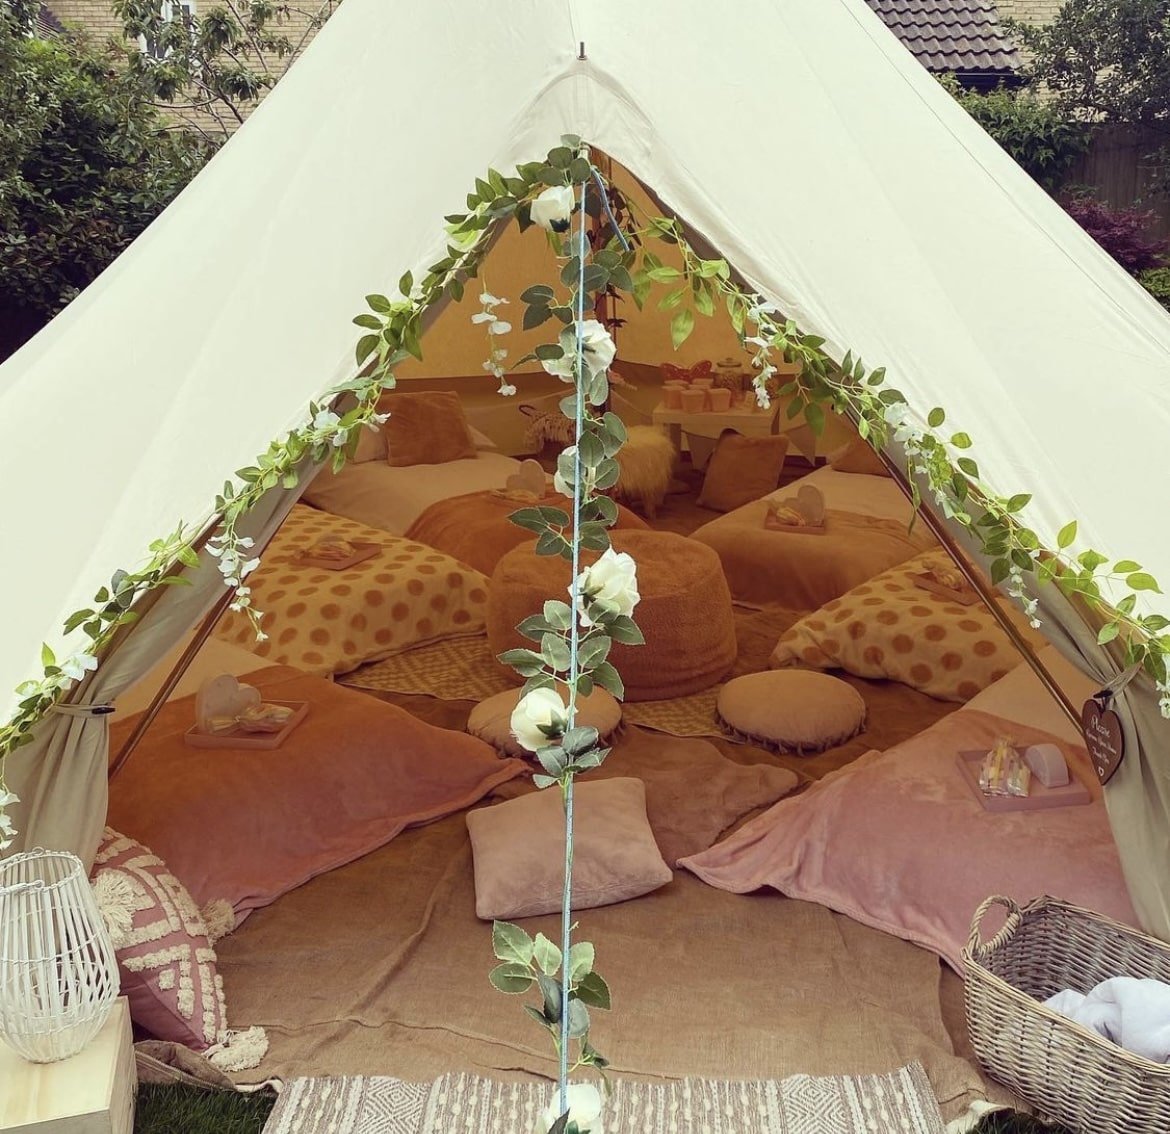 Raffles Boutique Hire - Sleepover Party Tents in Buckinghamshire